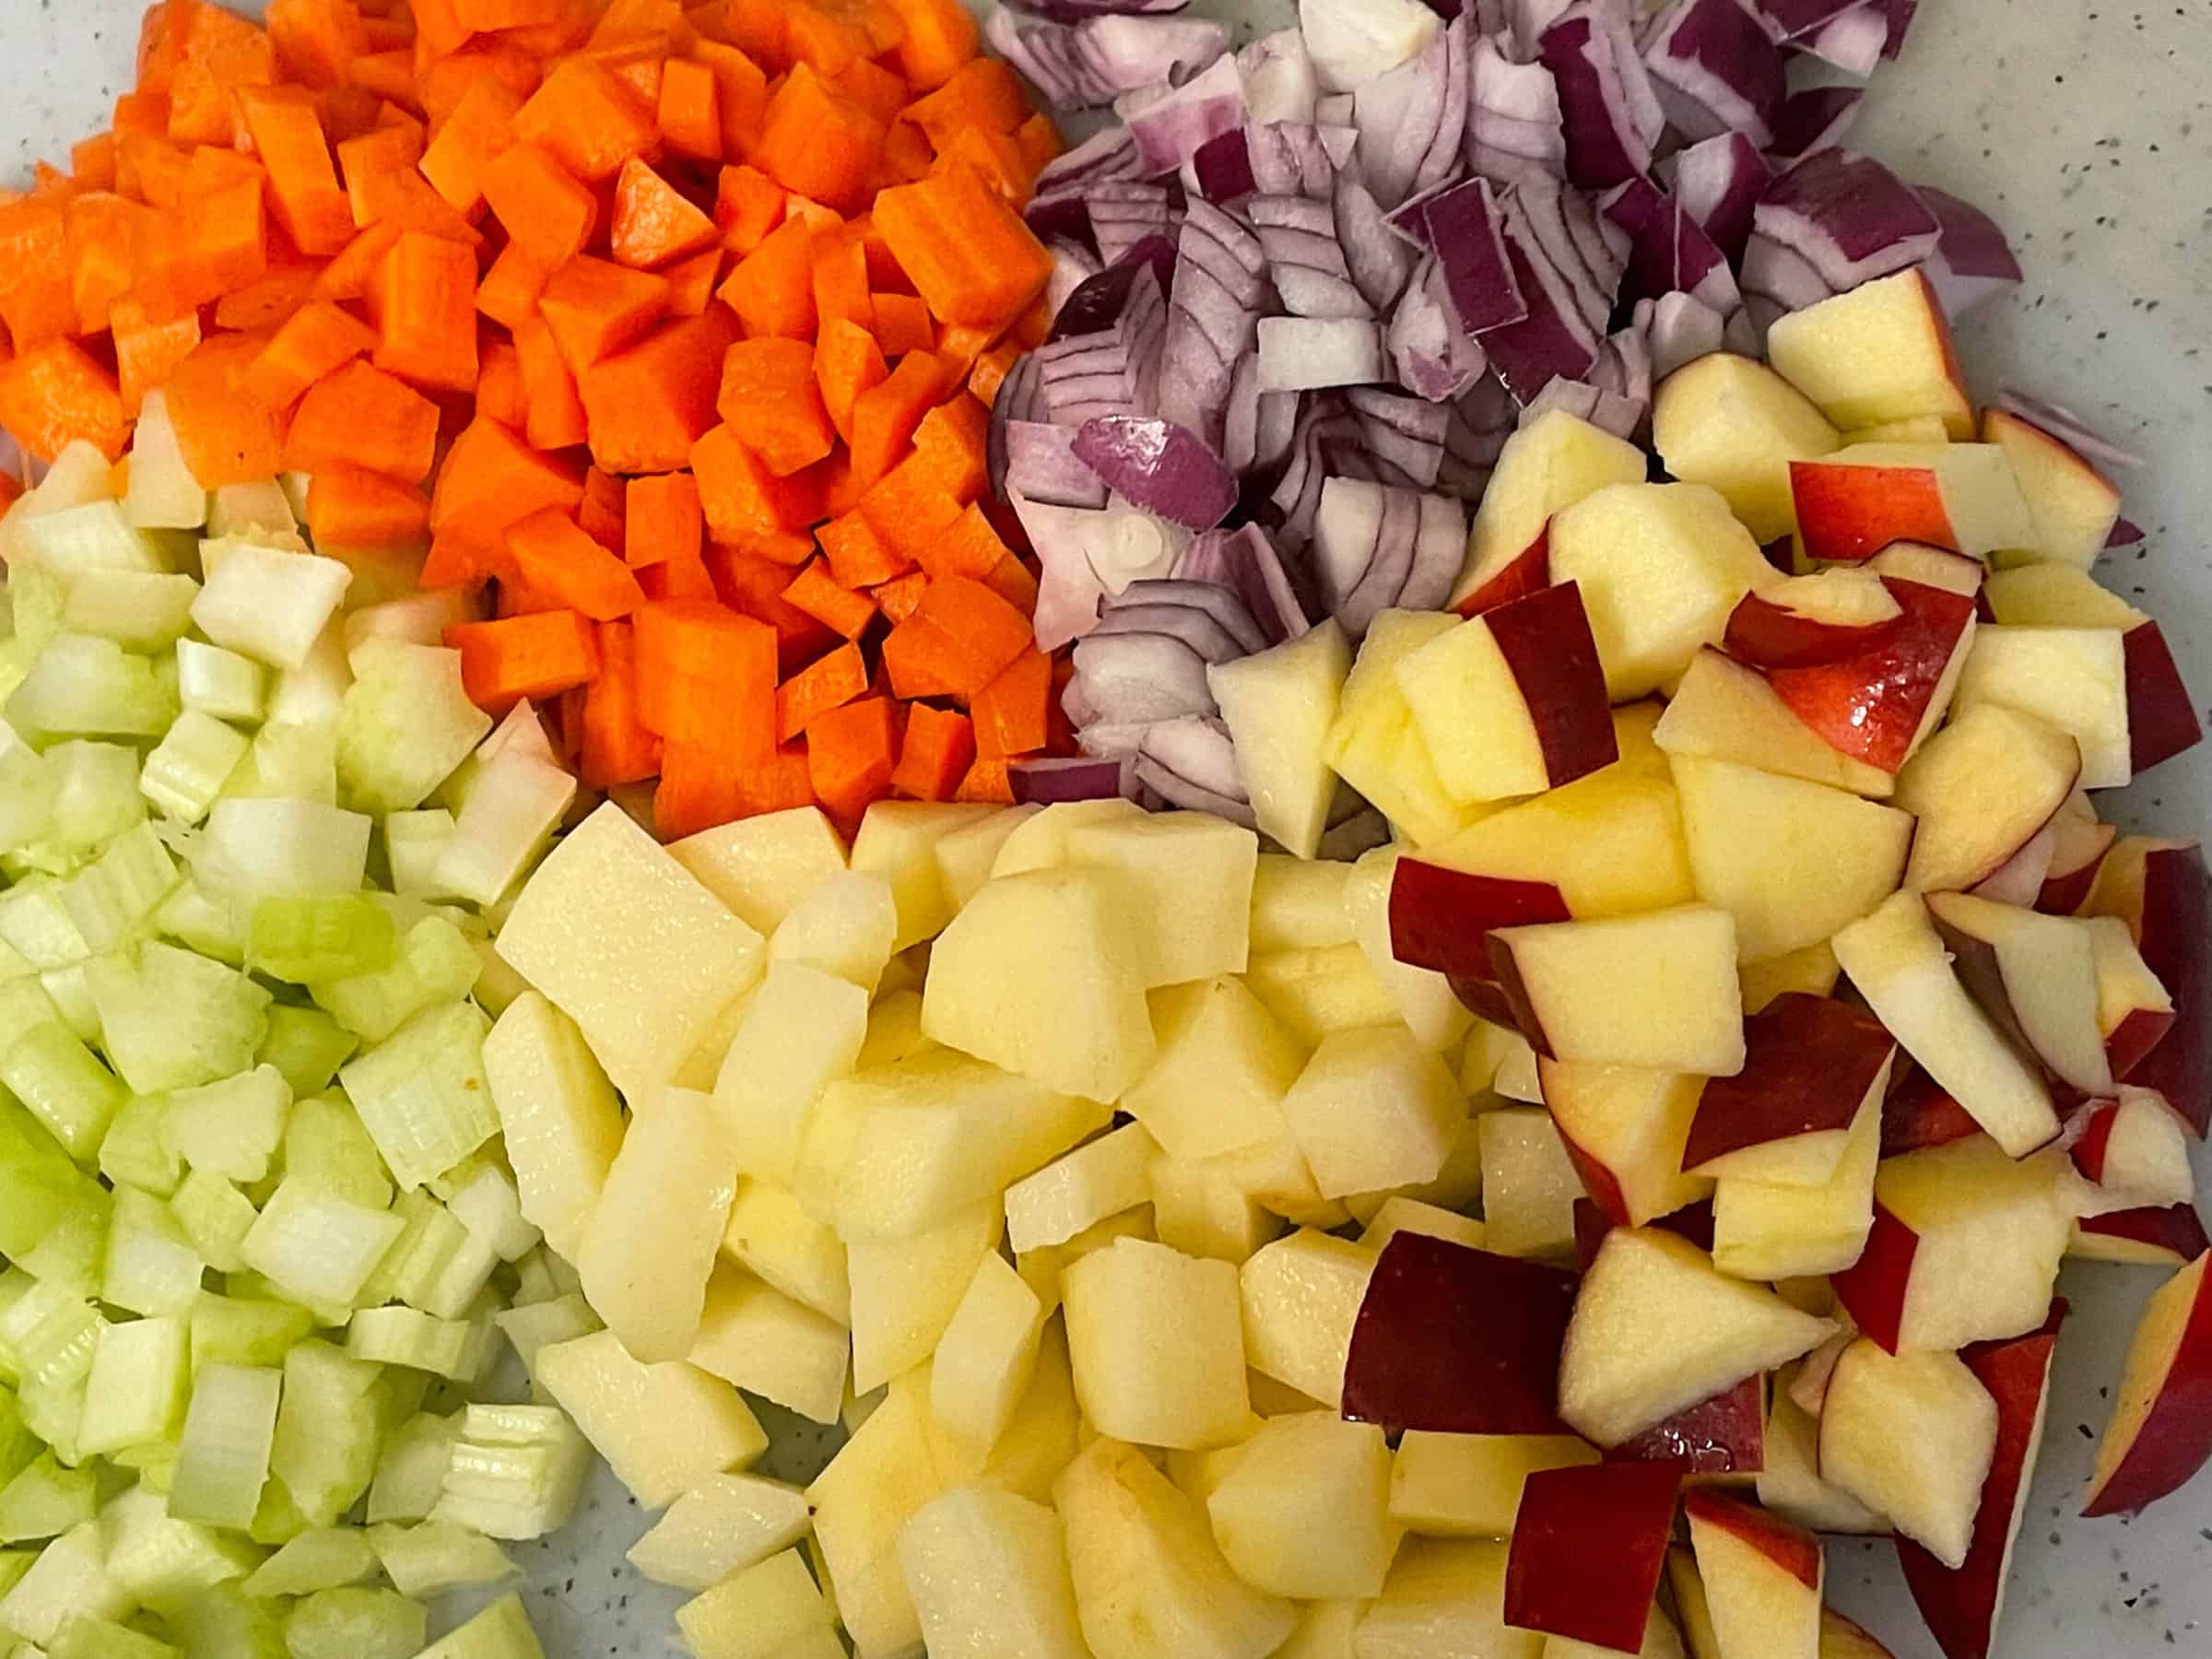 Soup veggies diced on a white chopping board.